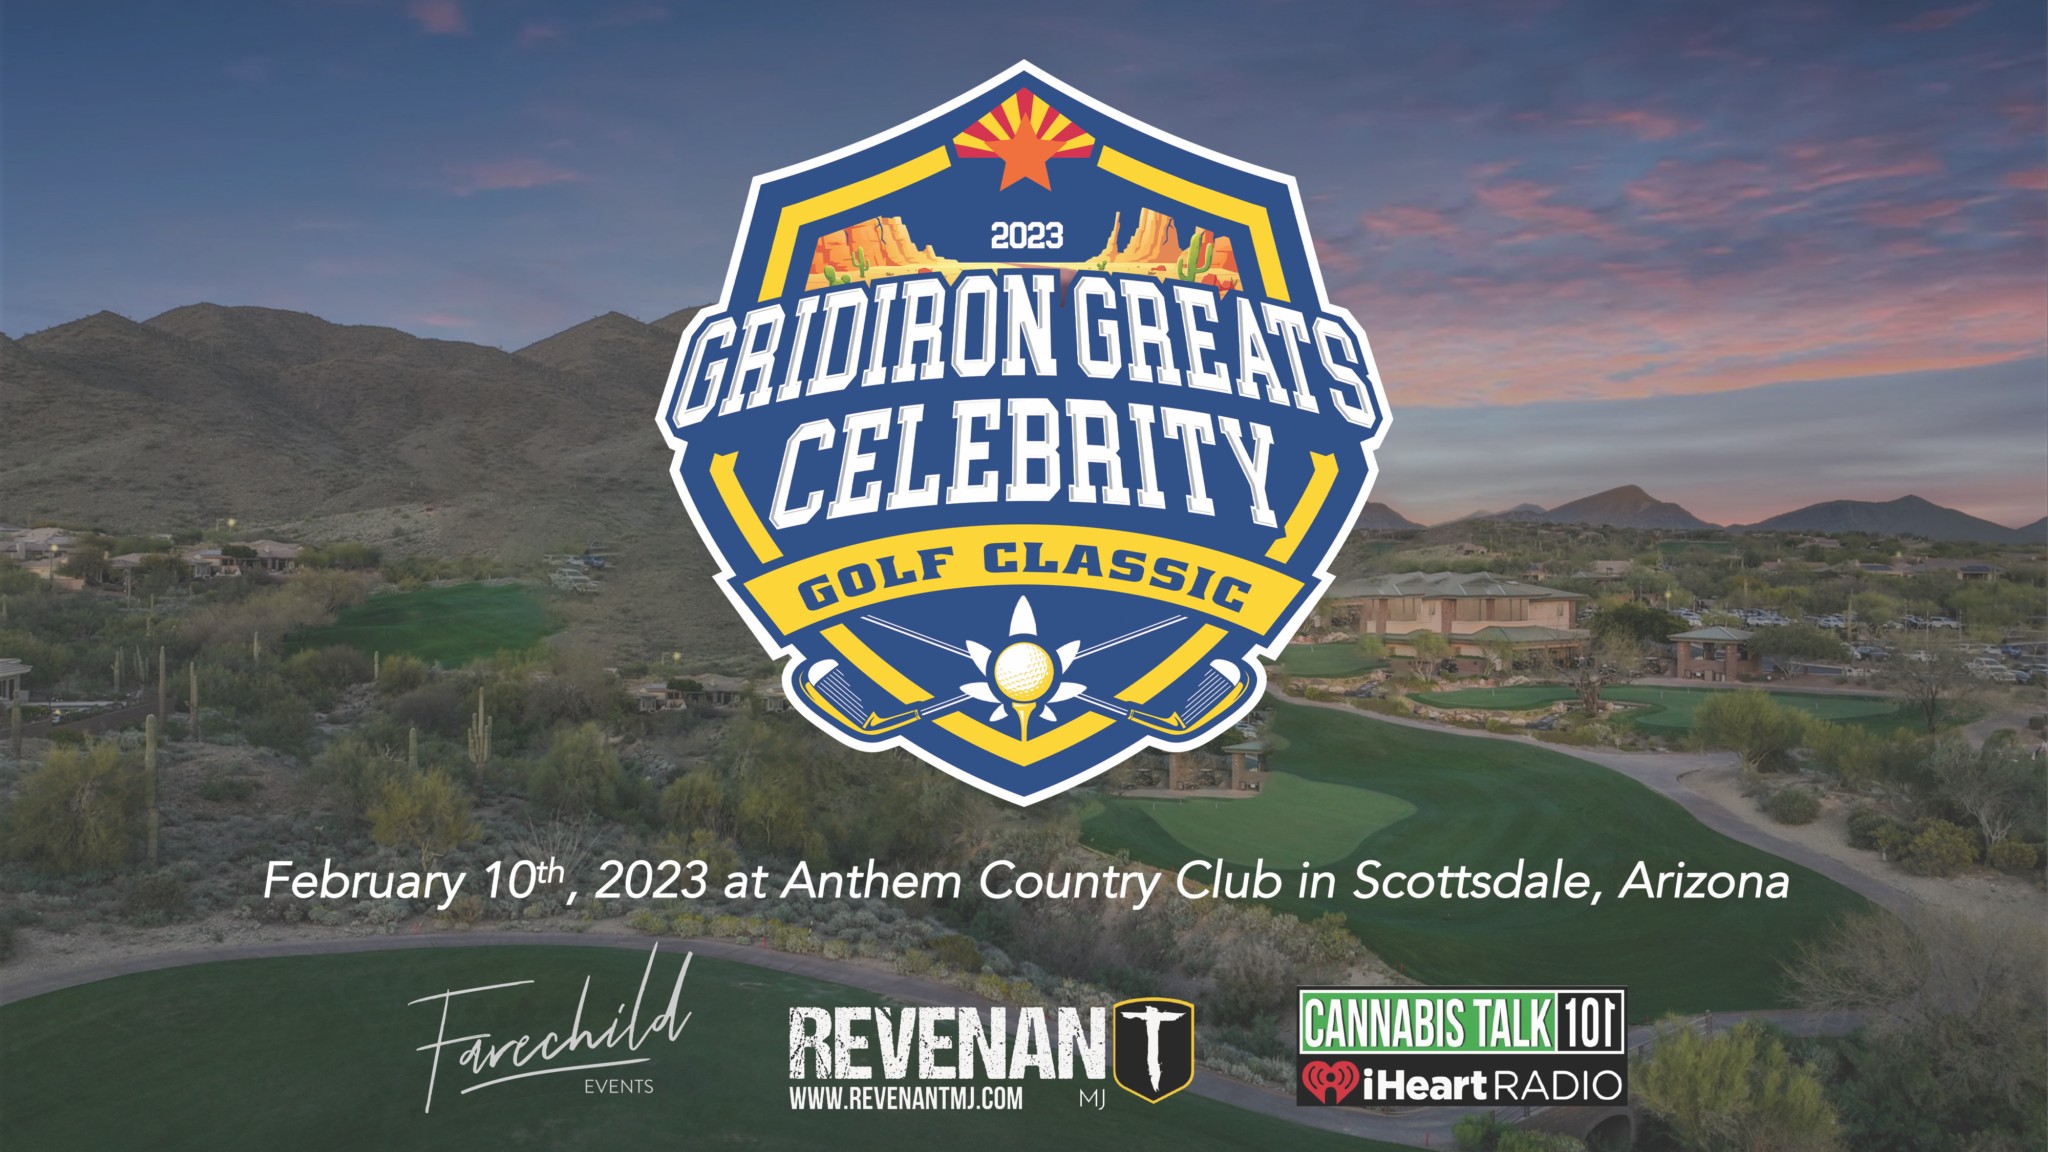 The Gridiron Greats Celebrity Golf Classic to be hosted in February of 2023